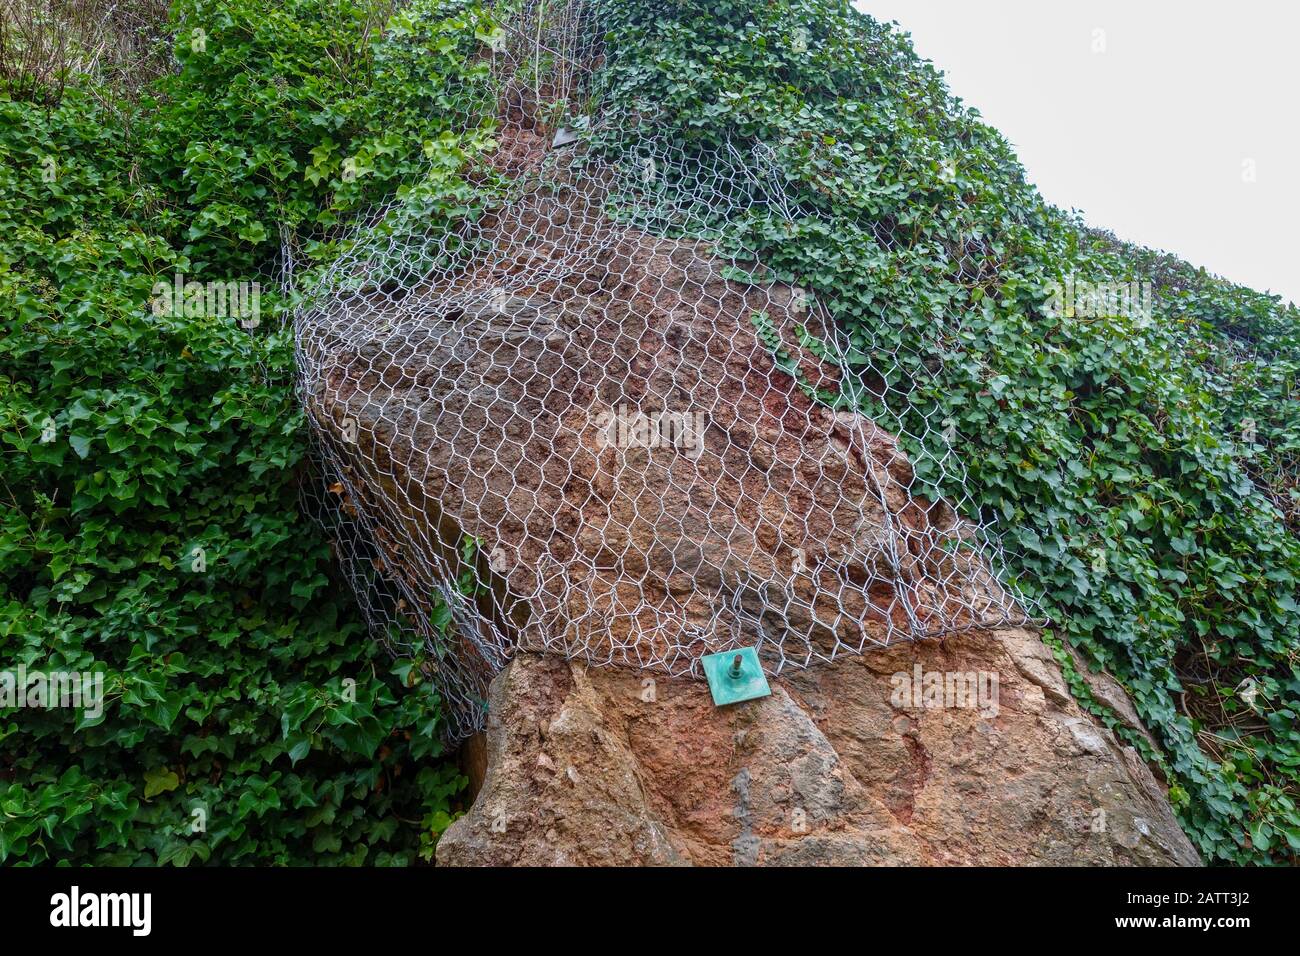 Metal Mesh covering loose rock to stop it falling off, England, UK Stock Photo